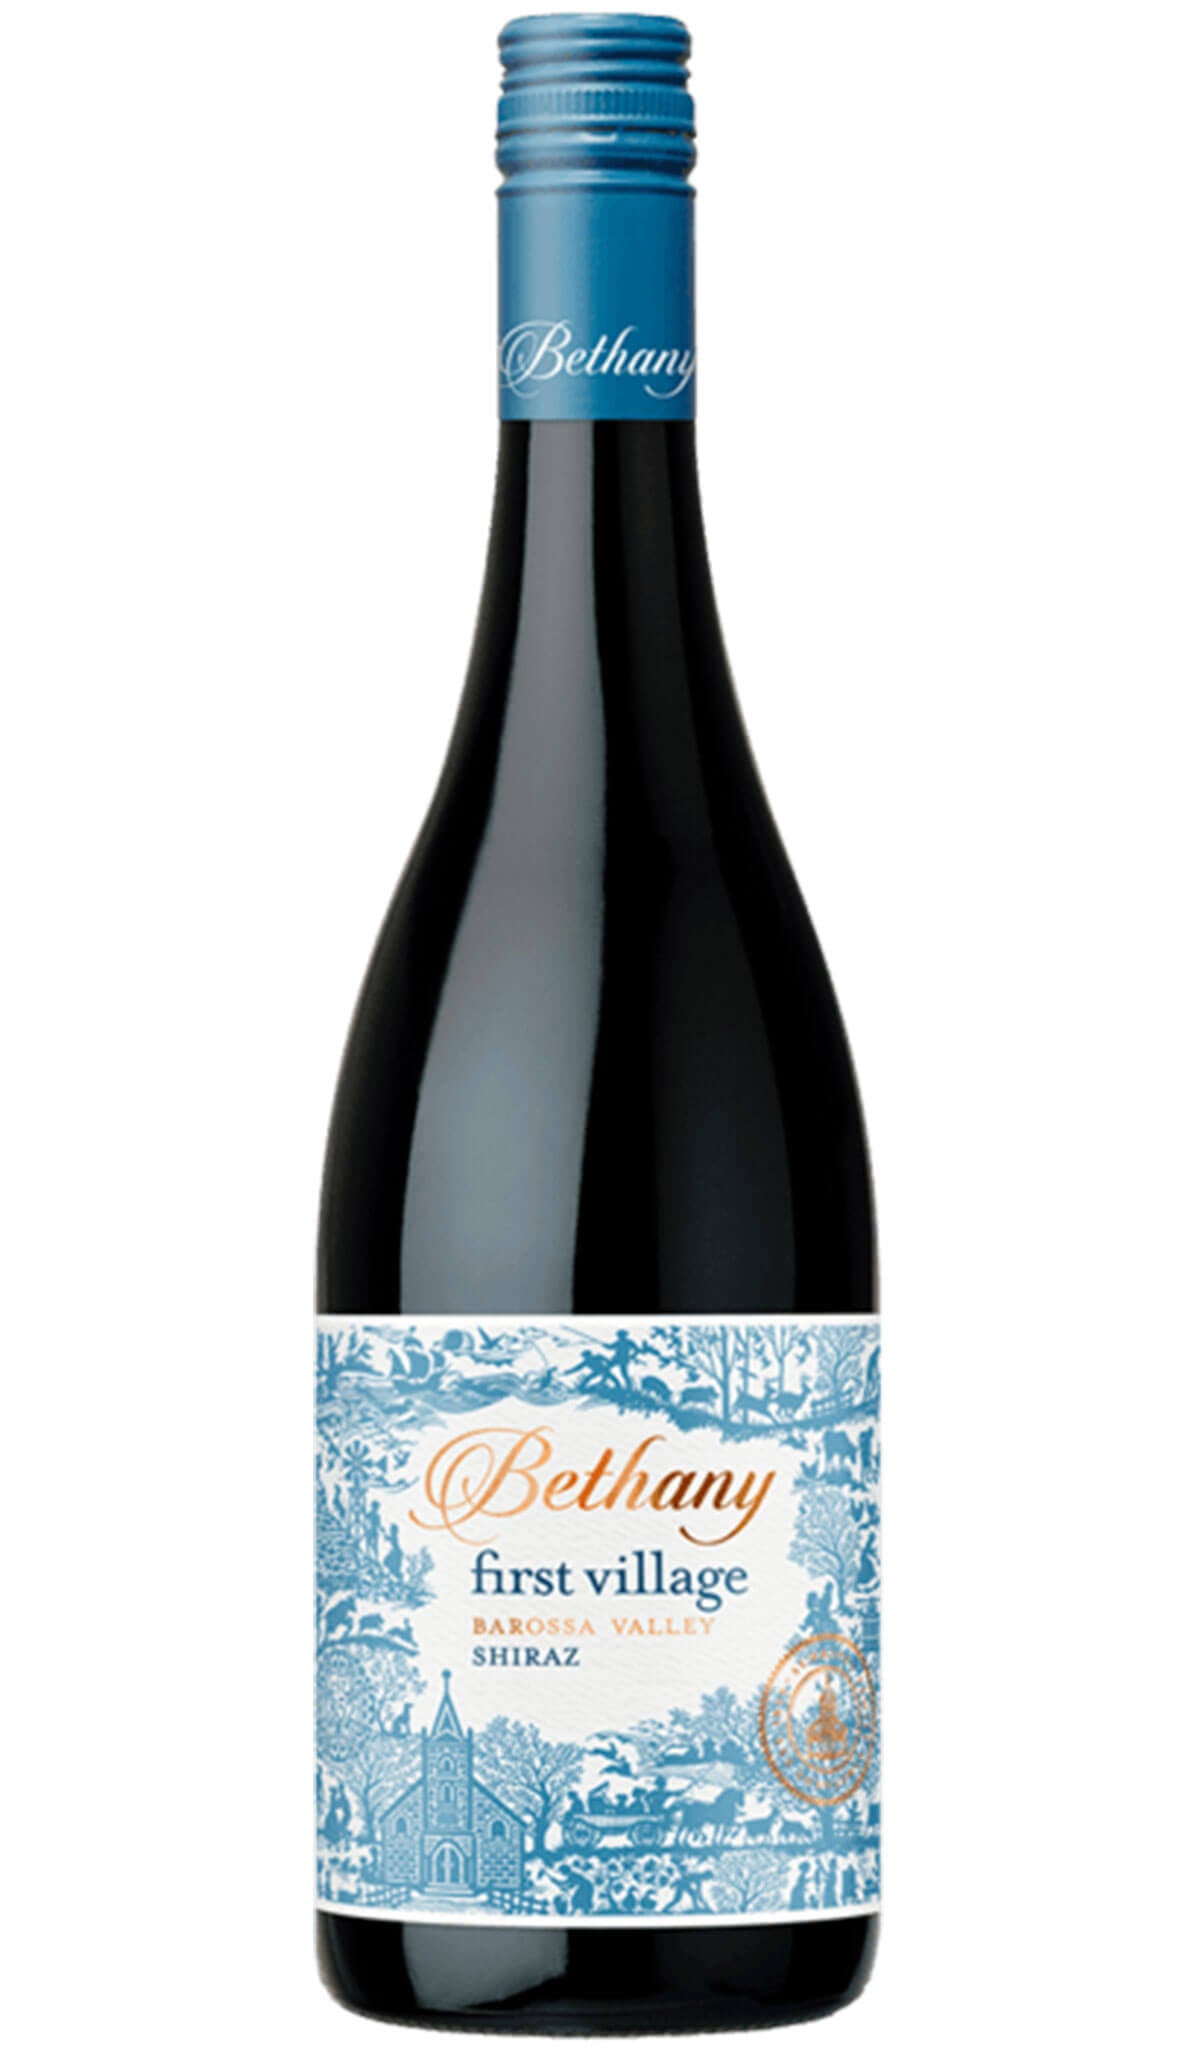 Find out more or buy Bethany 'First Village' Shiraz 2020 (Barossa Valley) online at Wine Sellers Direct - Australia’s independent liquor specialists.